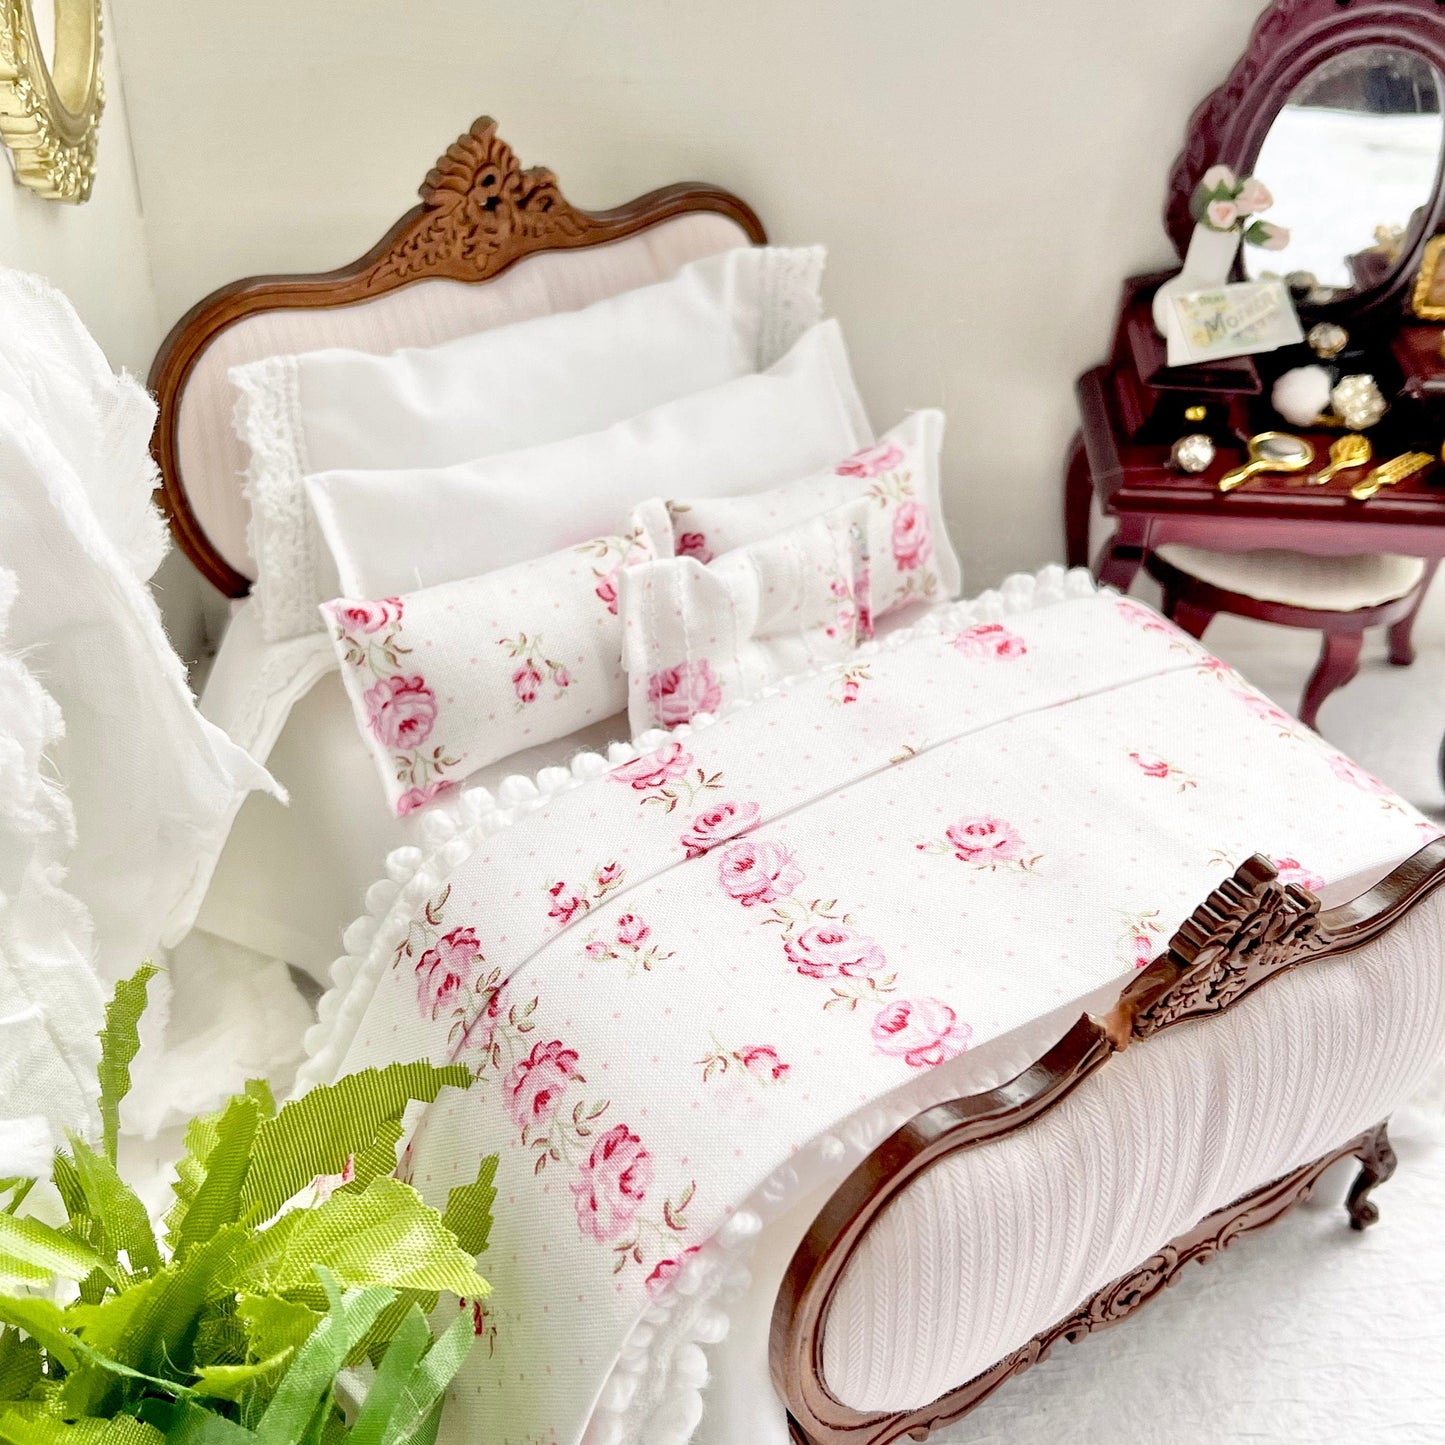 Chantallena Doll House Shabby Cottage - Eight Piece Shabby White Cotton Bedding Set with Pink Rose Trellis Bed Runner